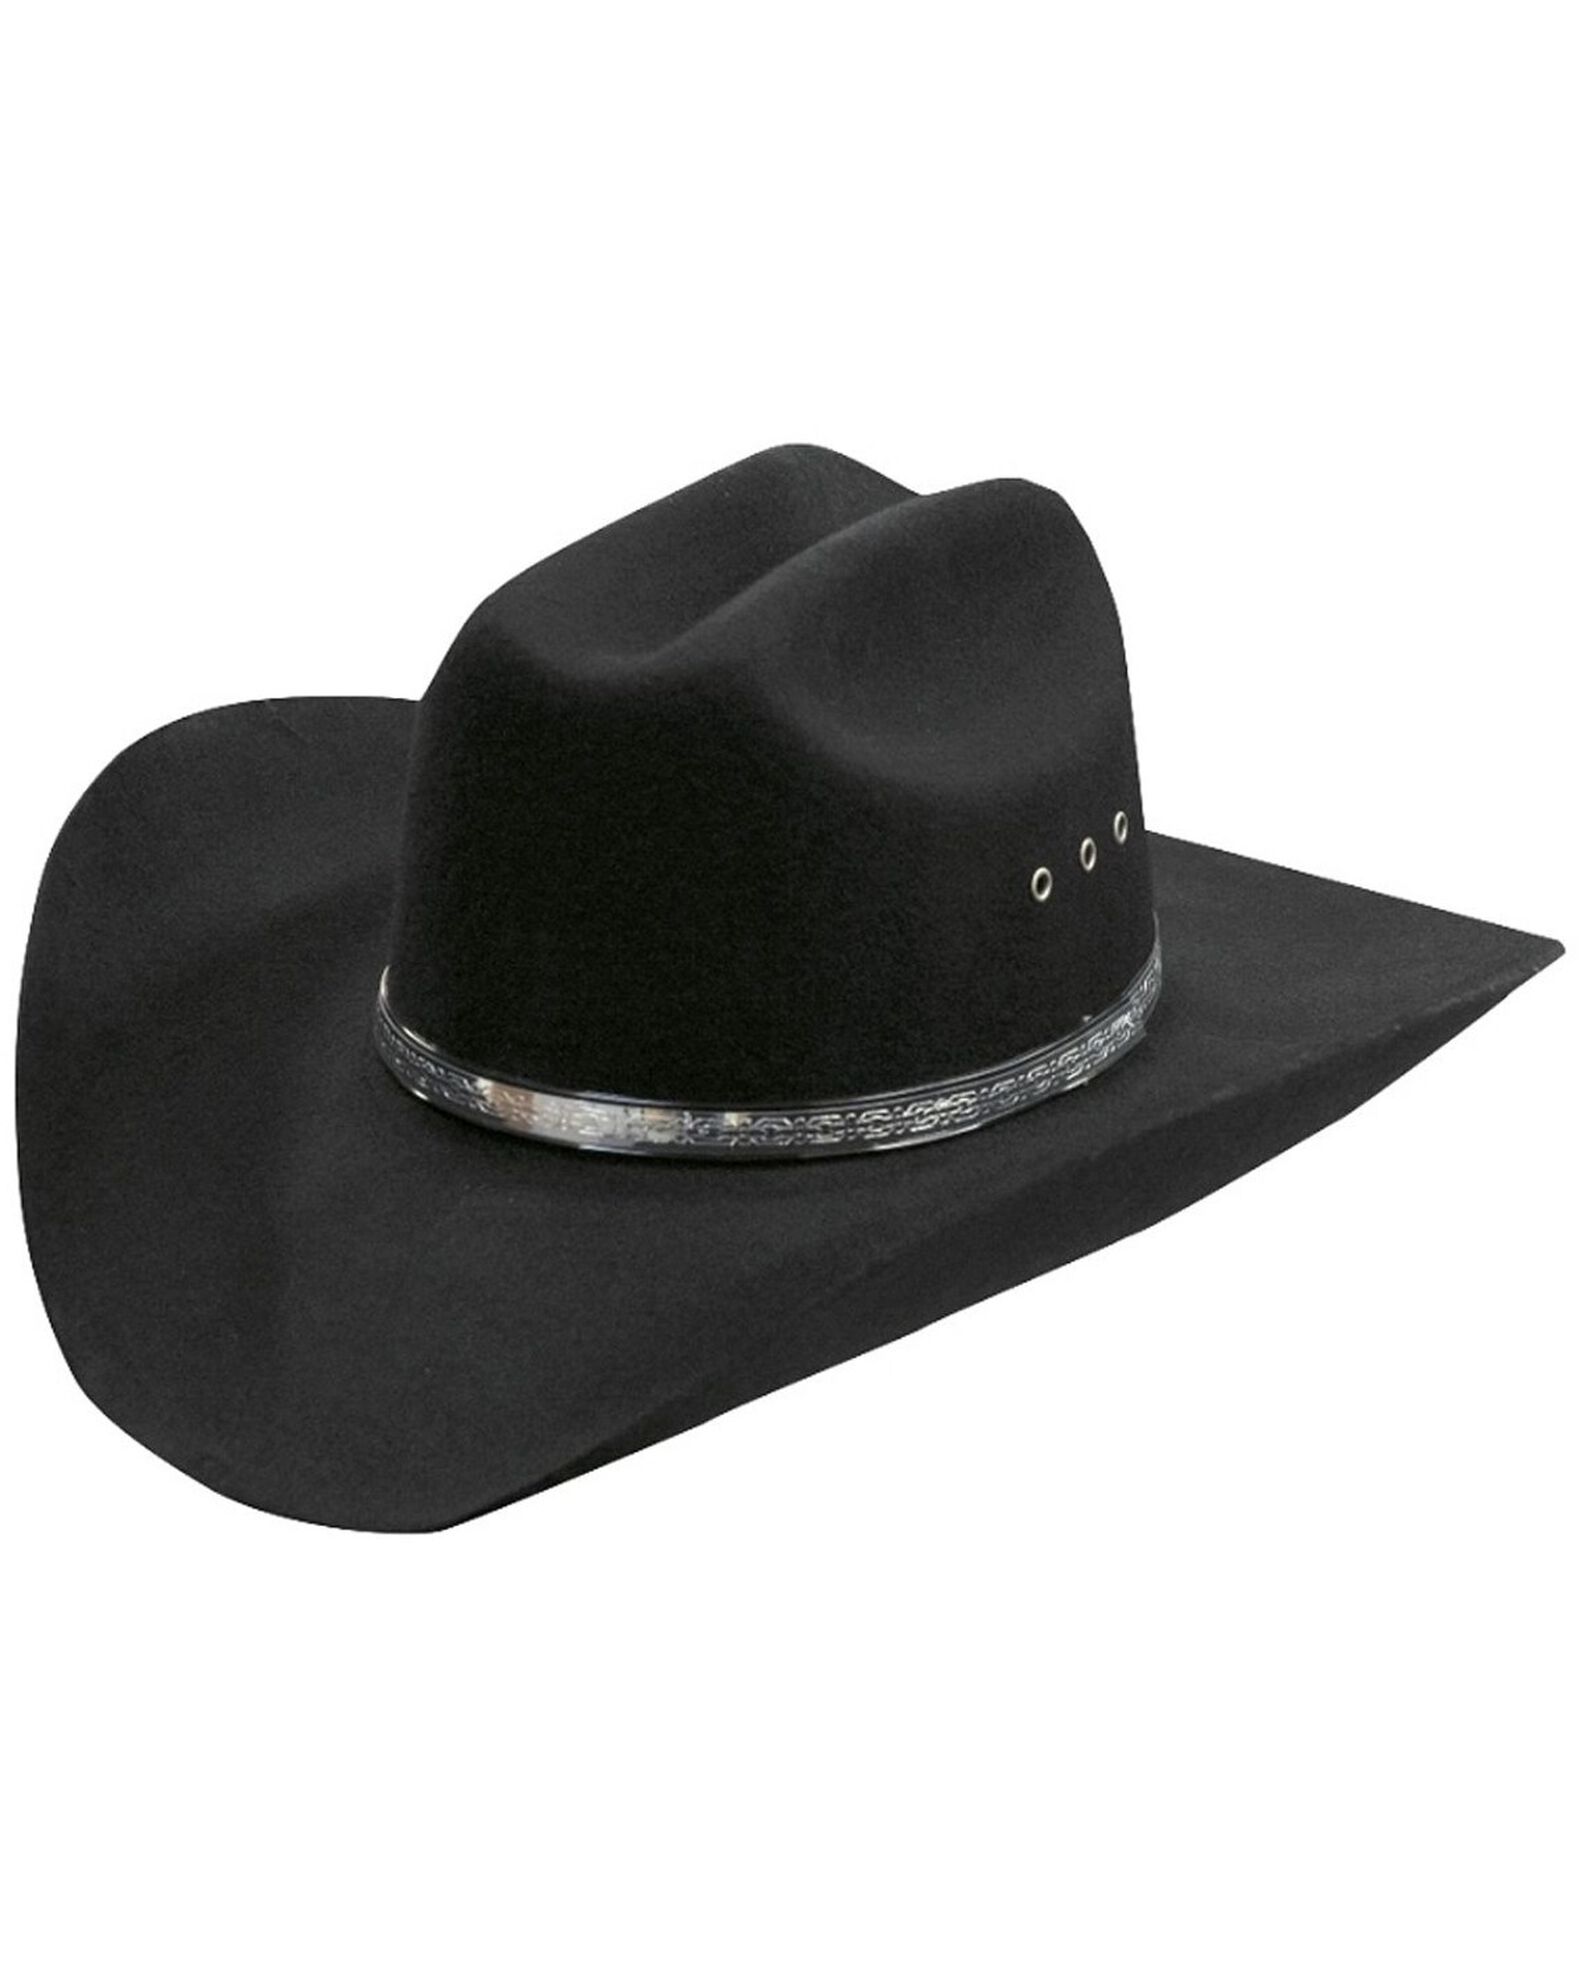 Hat Accessories: Hat Bands & More - Boot Barn